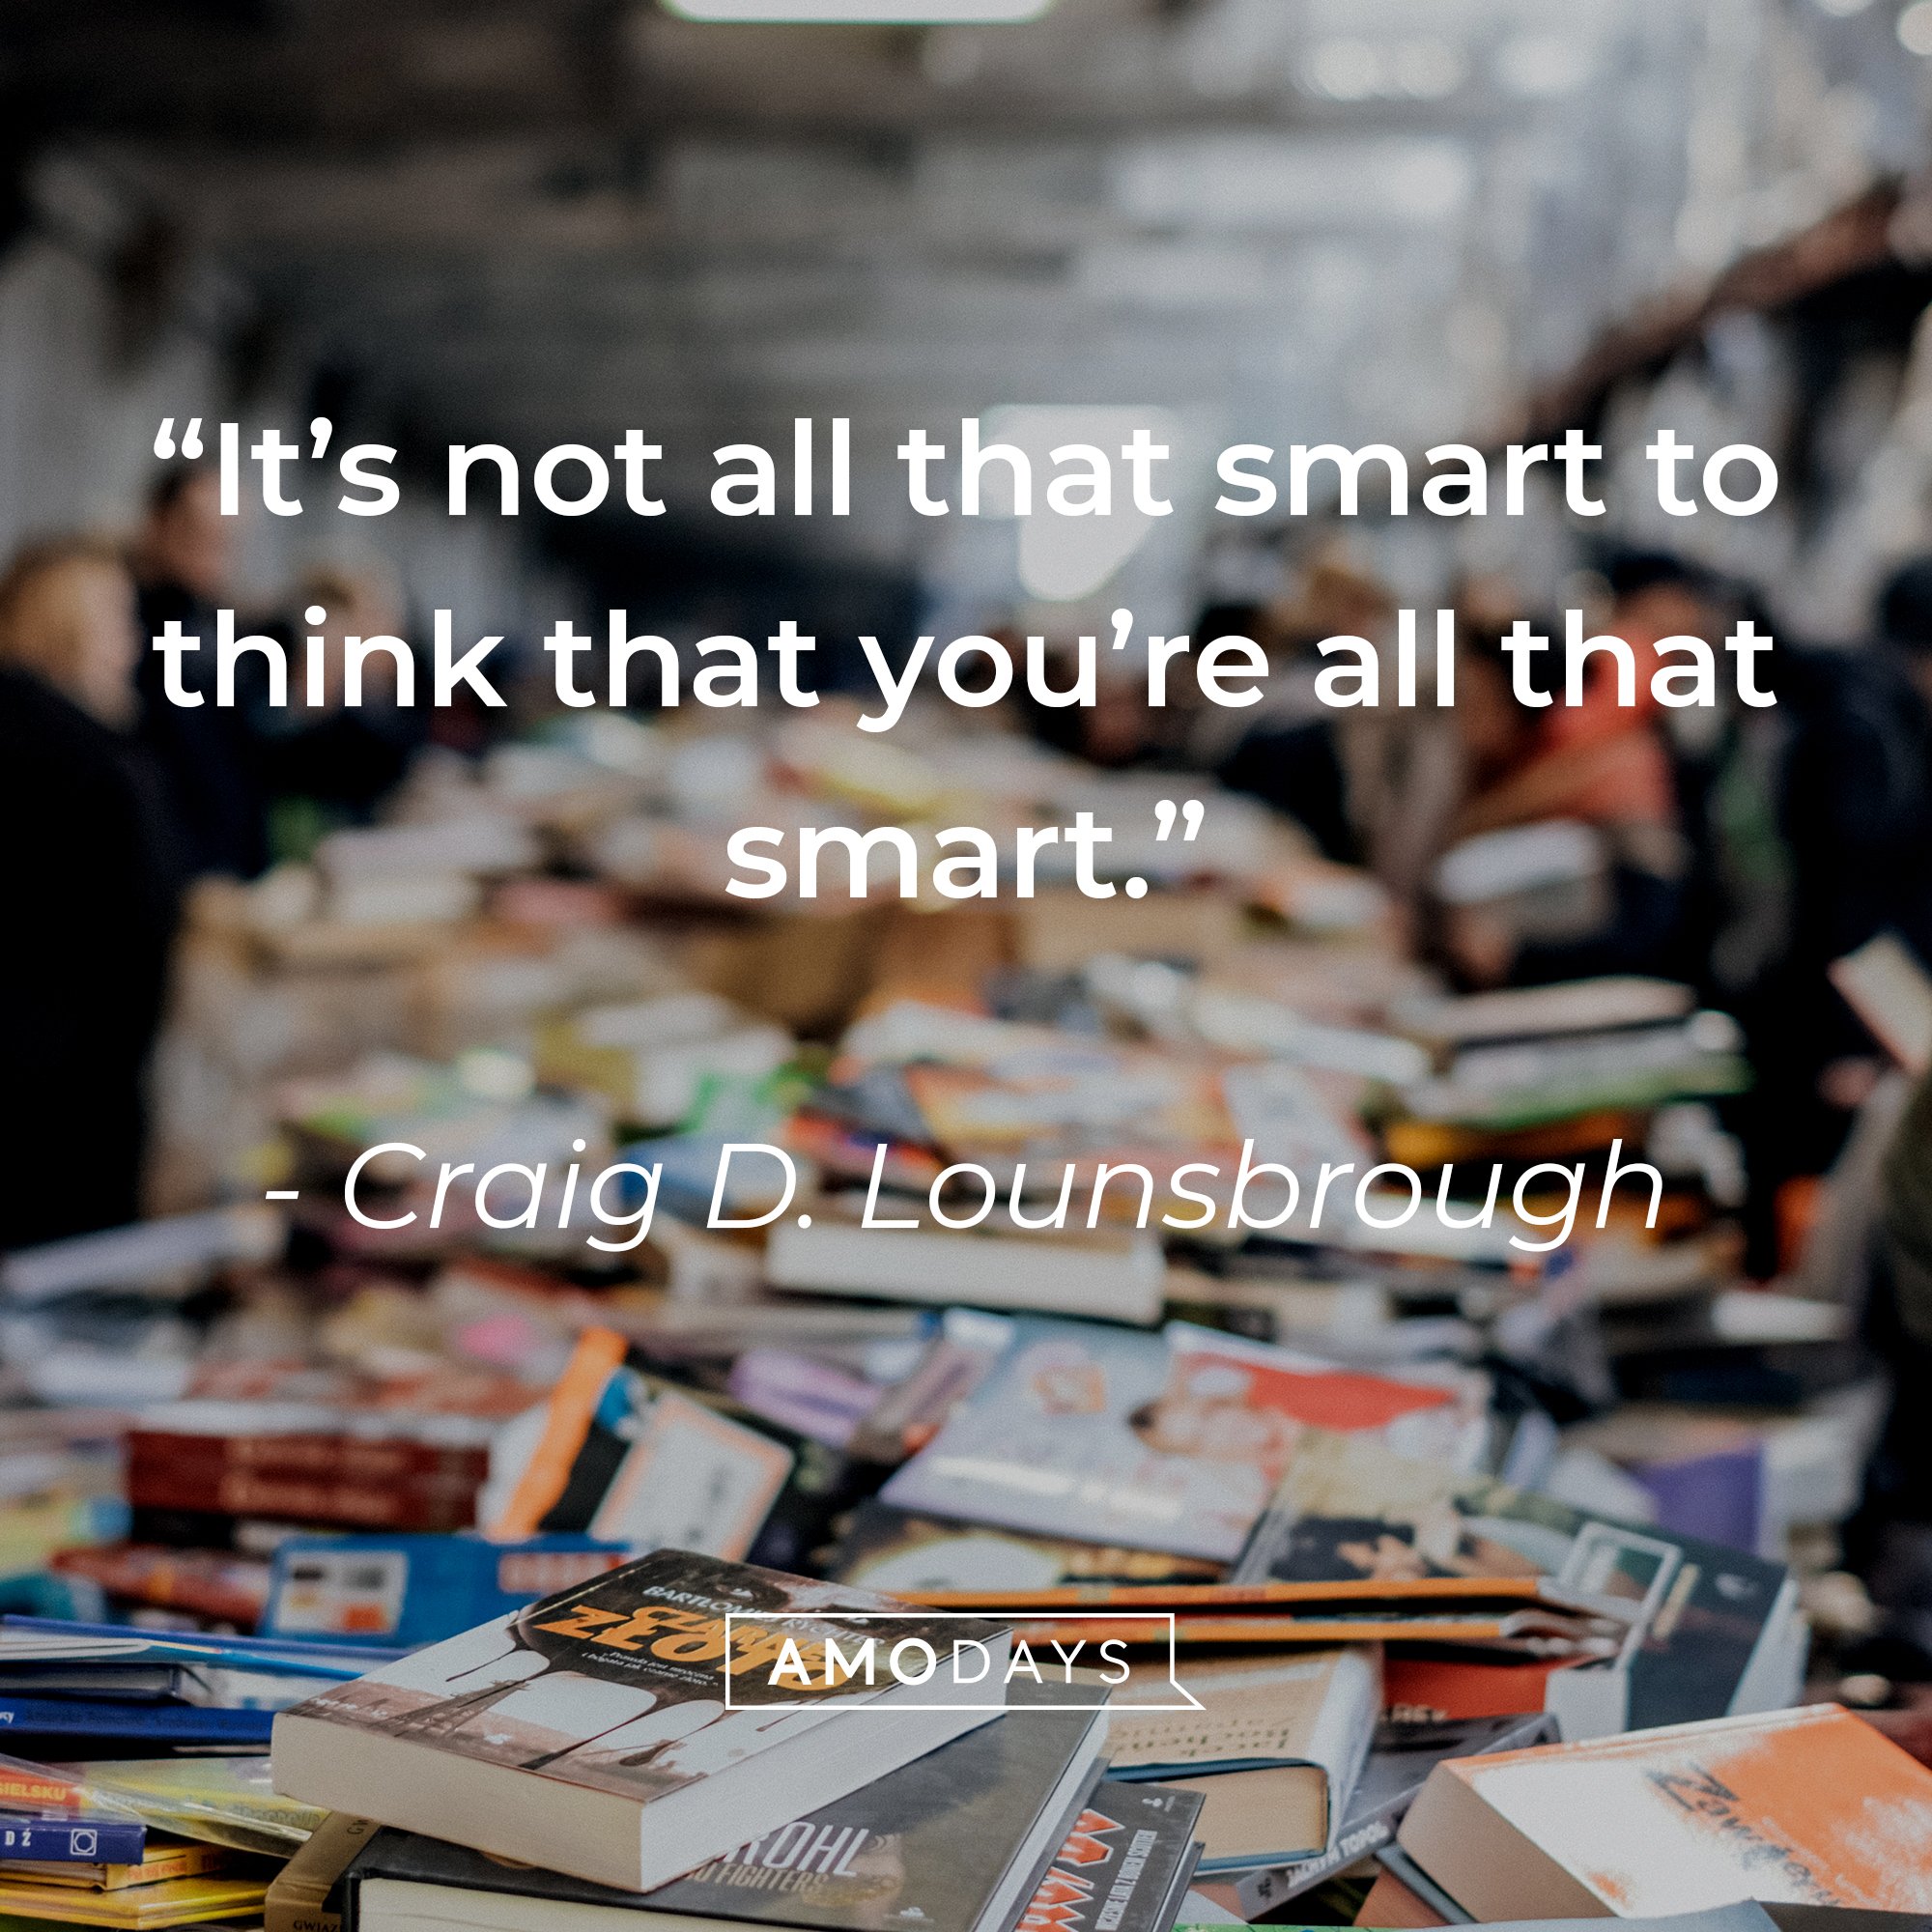 Craig D. Lounsbrough’s quote:“It’s not all that smart to think that you’re all that smart.” | Image: Amodays  